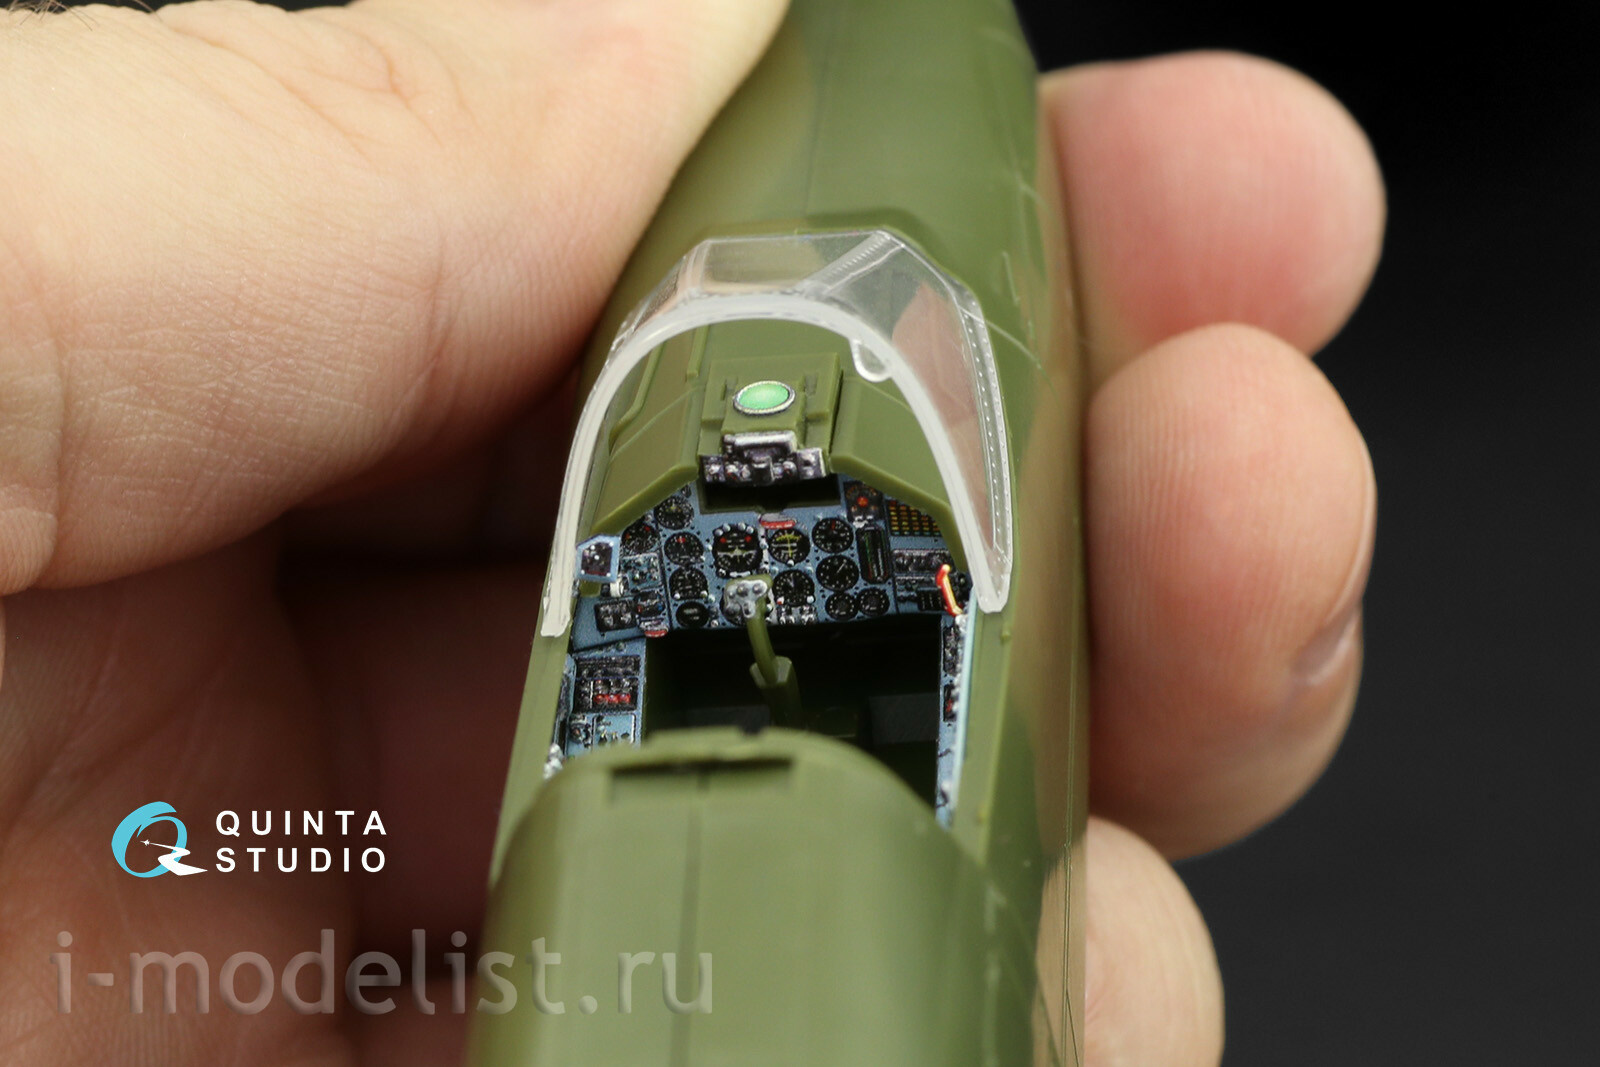 QDS-48249 Quinta Studio 1/48 3D dashboard decal for the model Soviet Sukhhoy-25 attack aircraft of the Zvezda company